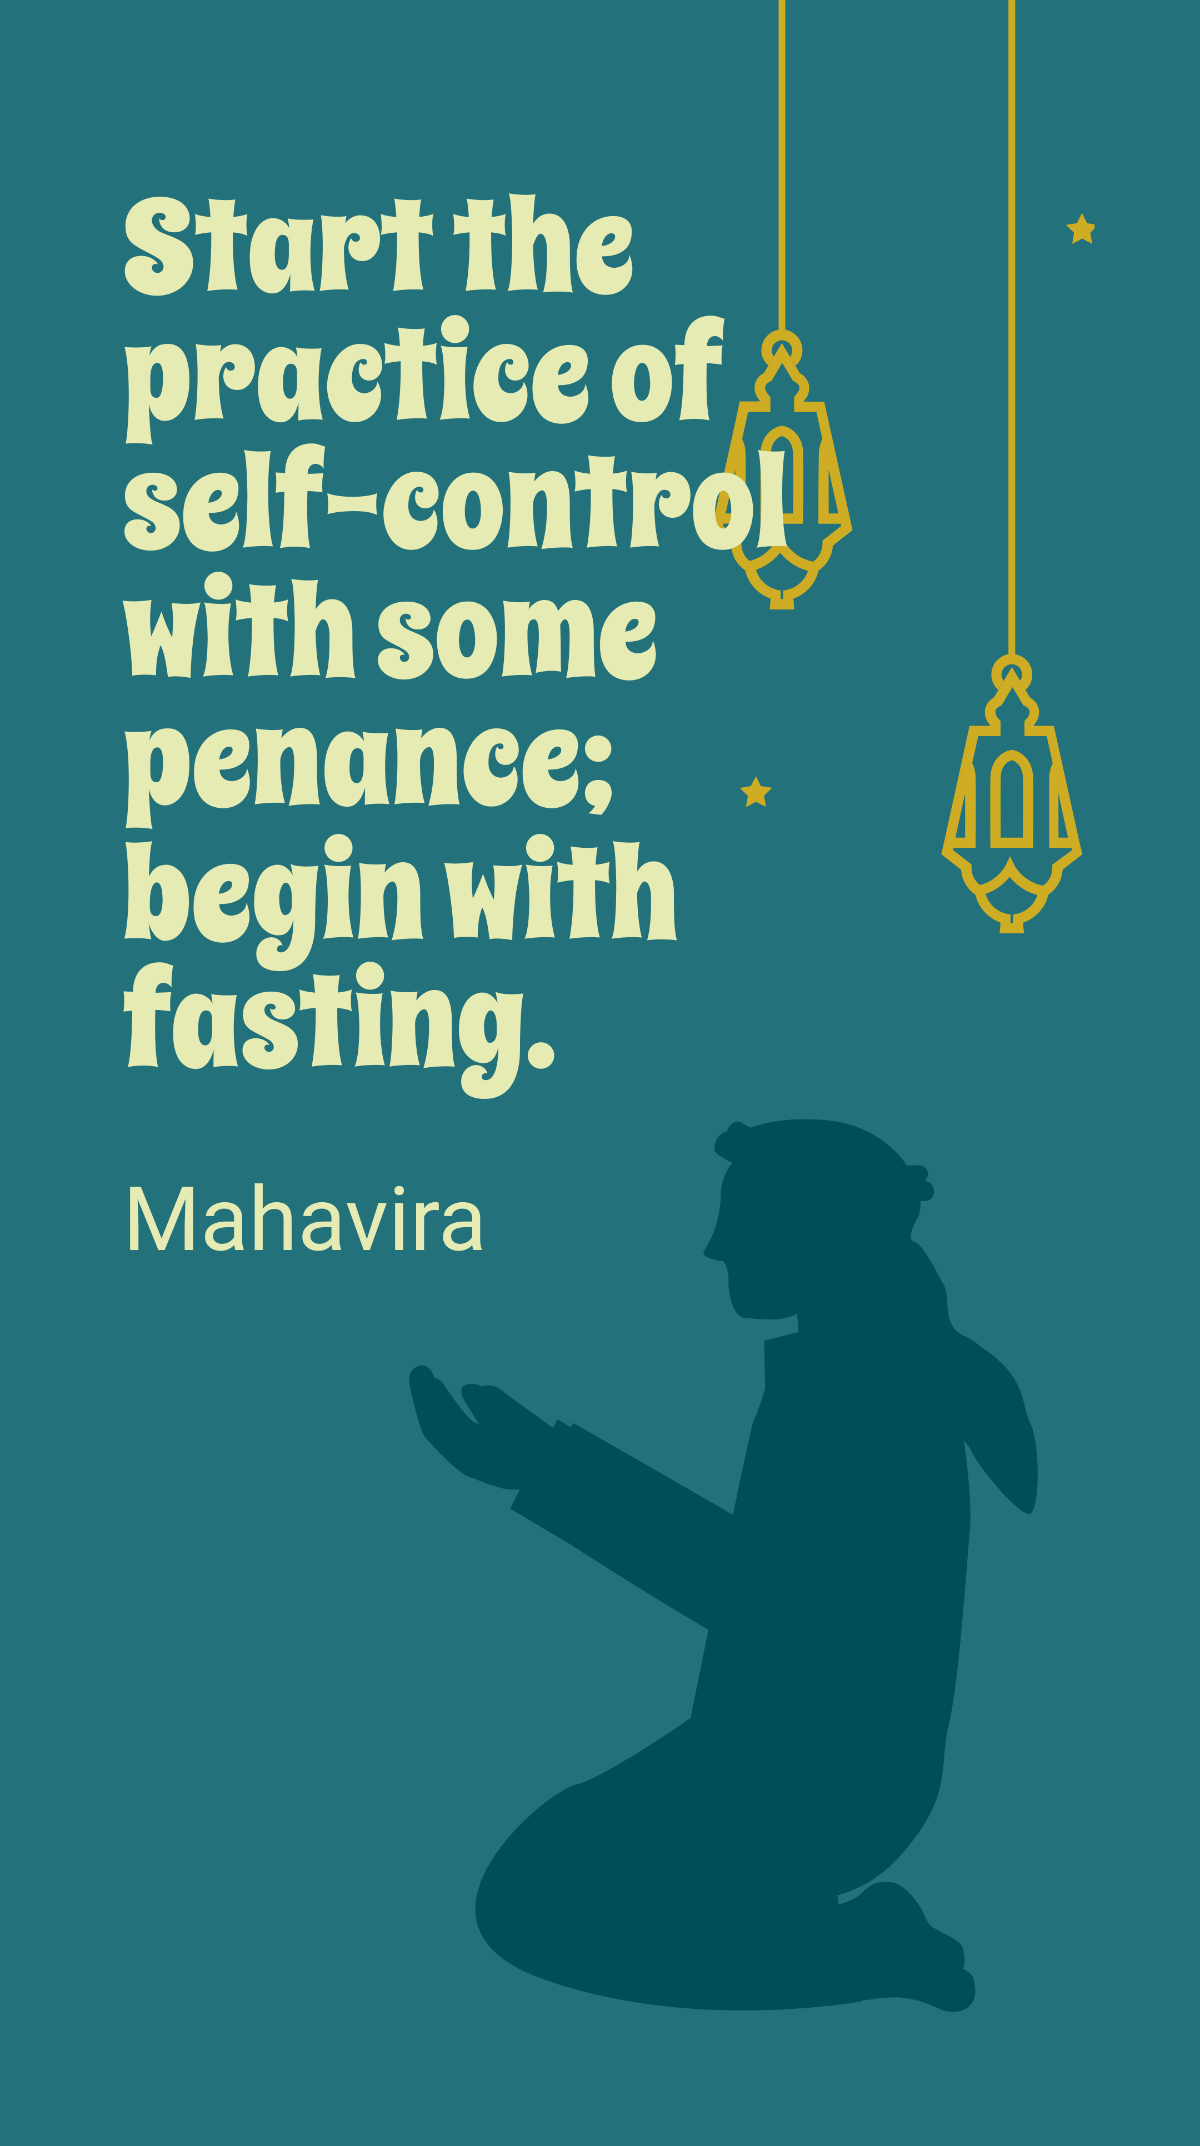 Mahavira - Start the practice of self-control with some penance; begin with fasting. Template